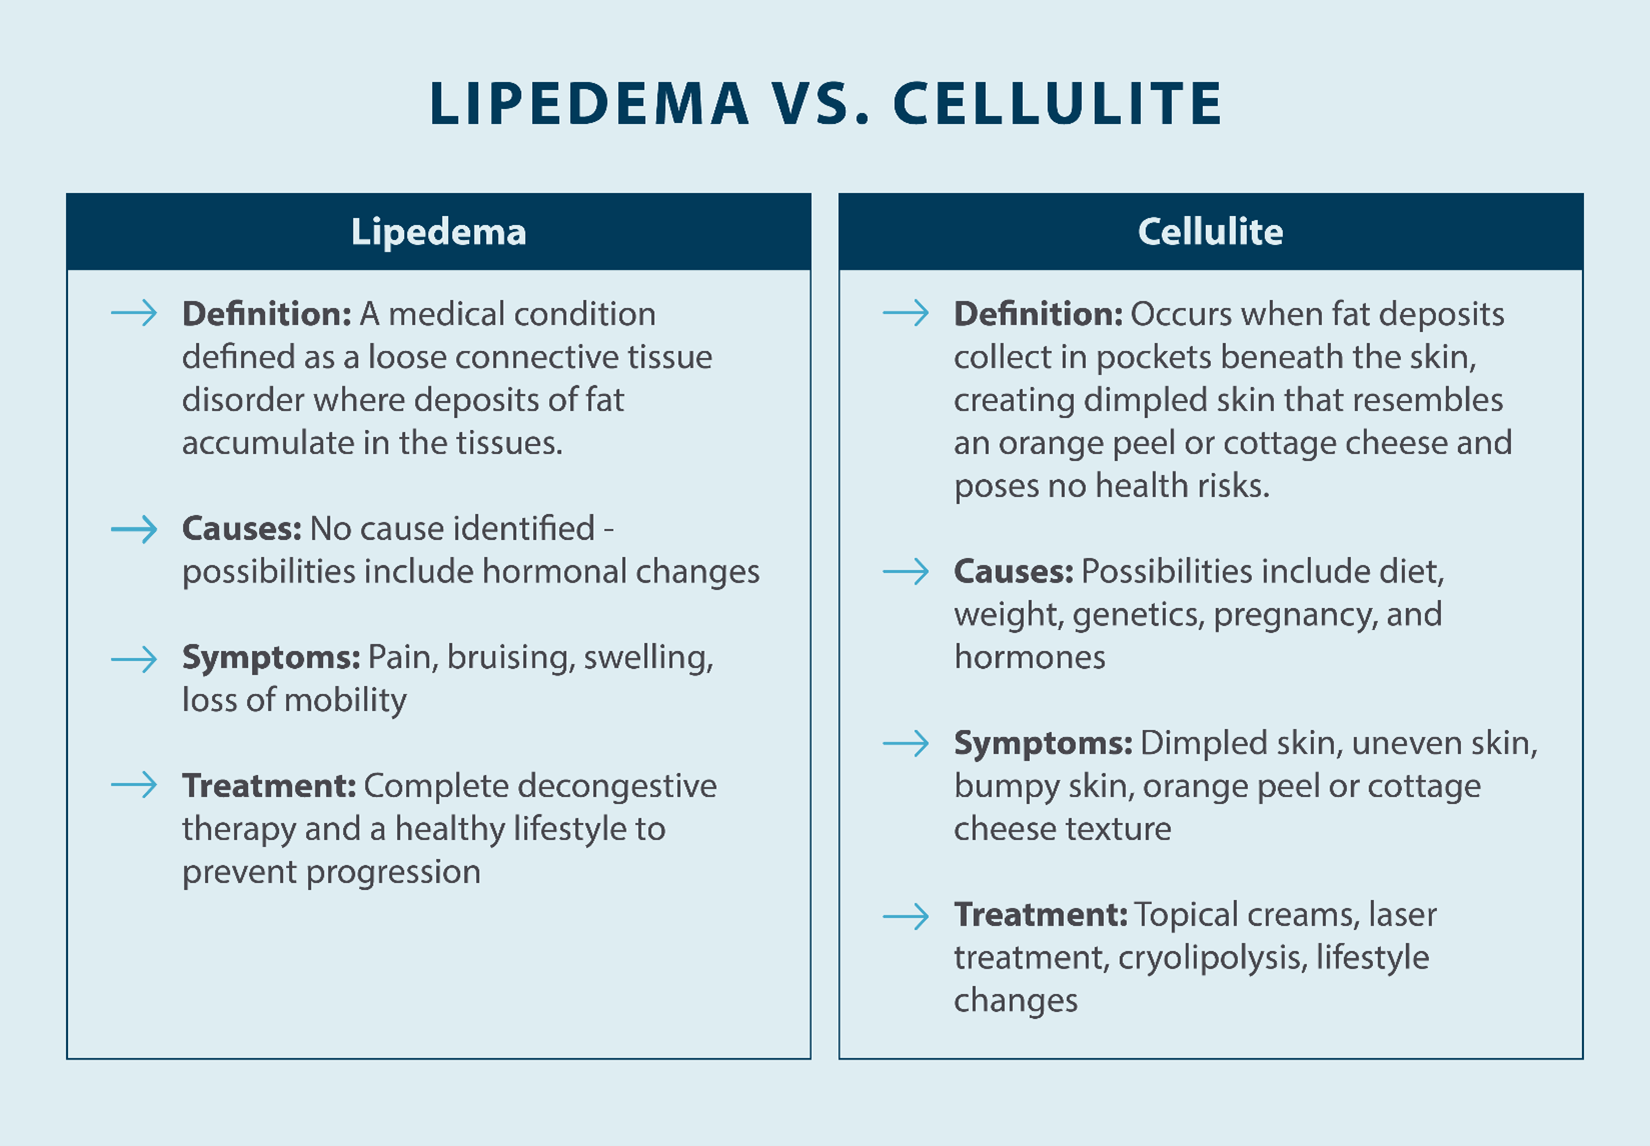 lipedema versus cellulite; definitions, causes, symptoms, and treatments